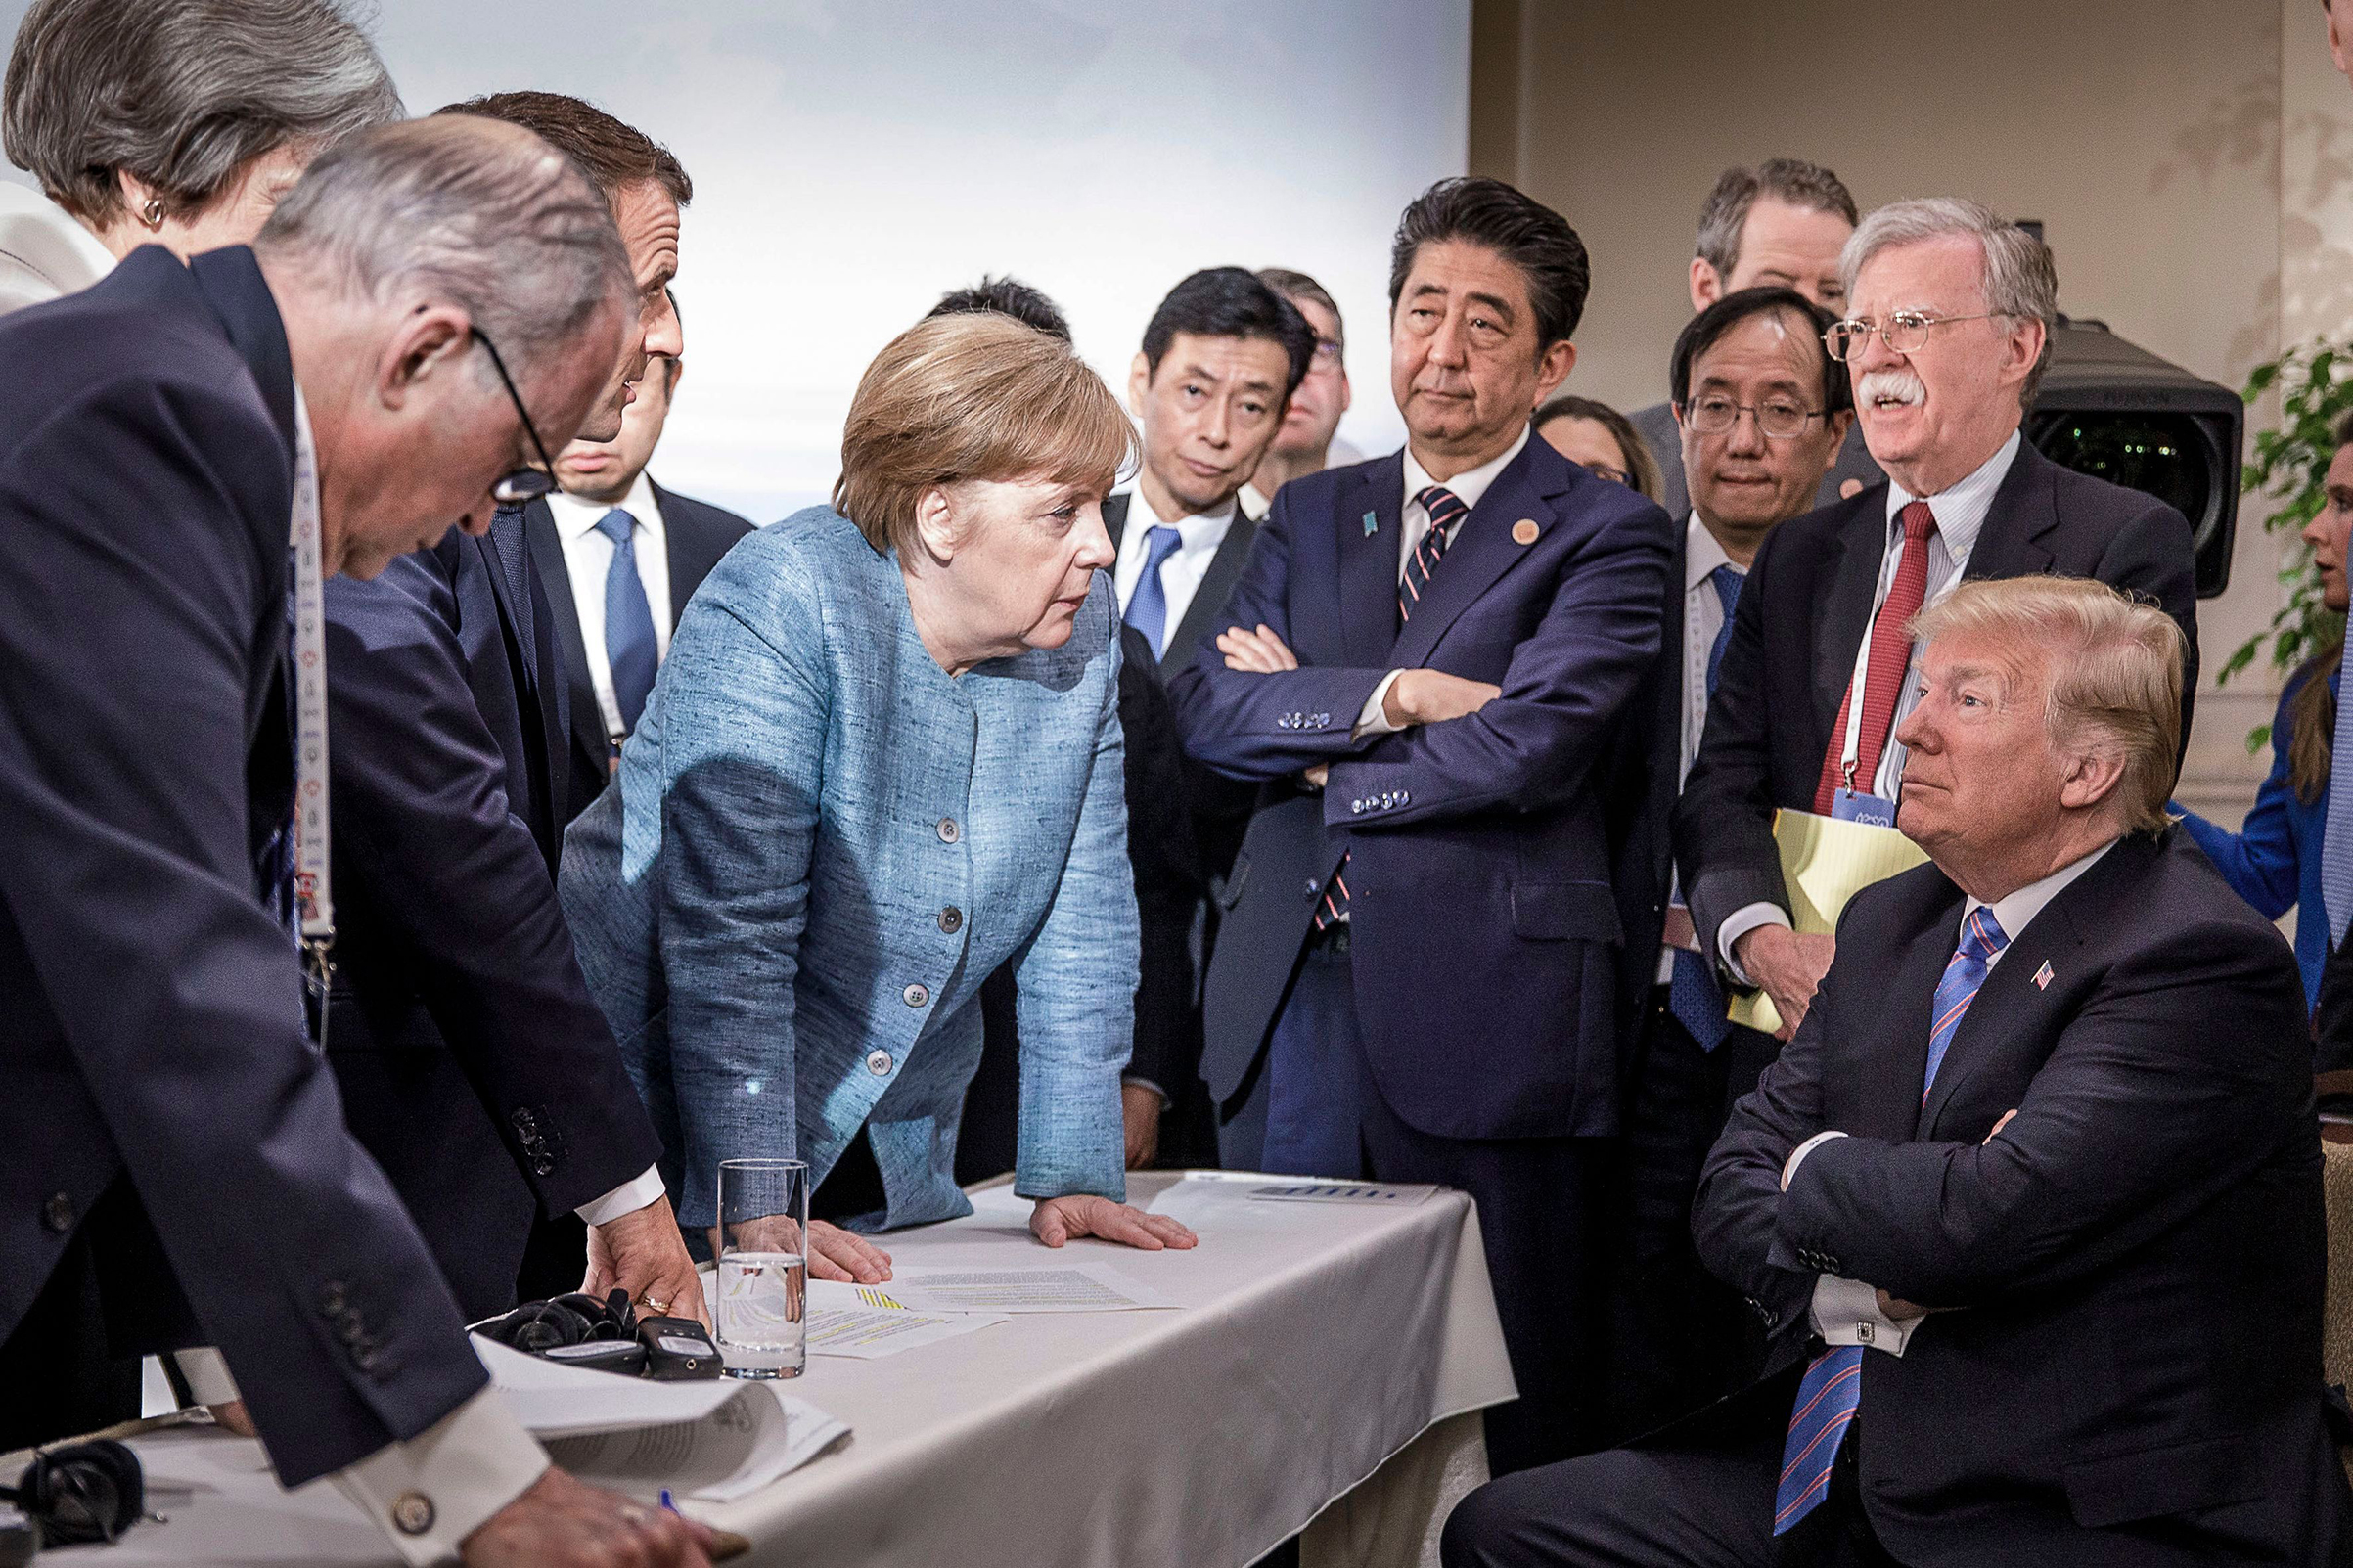 A handout photograph from the German government shows a group of leaders at the Group of Seven summit, including German Chancellor Angela Merkel and President Trump, in Canada on June 9, 2018. (Jesco Denzel—EPA-EFE/Shutterstock)